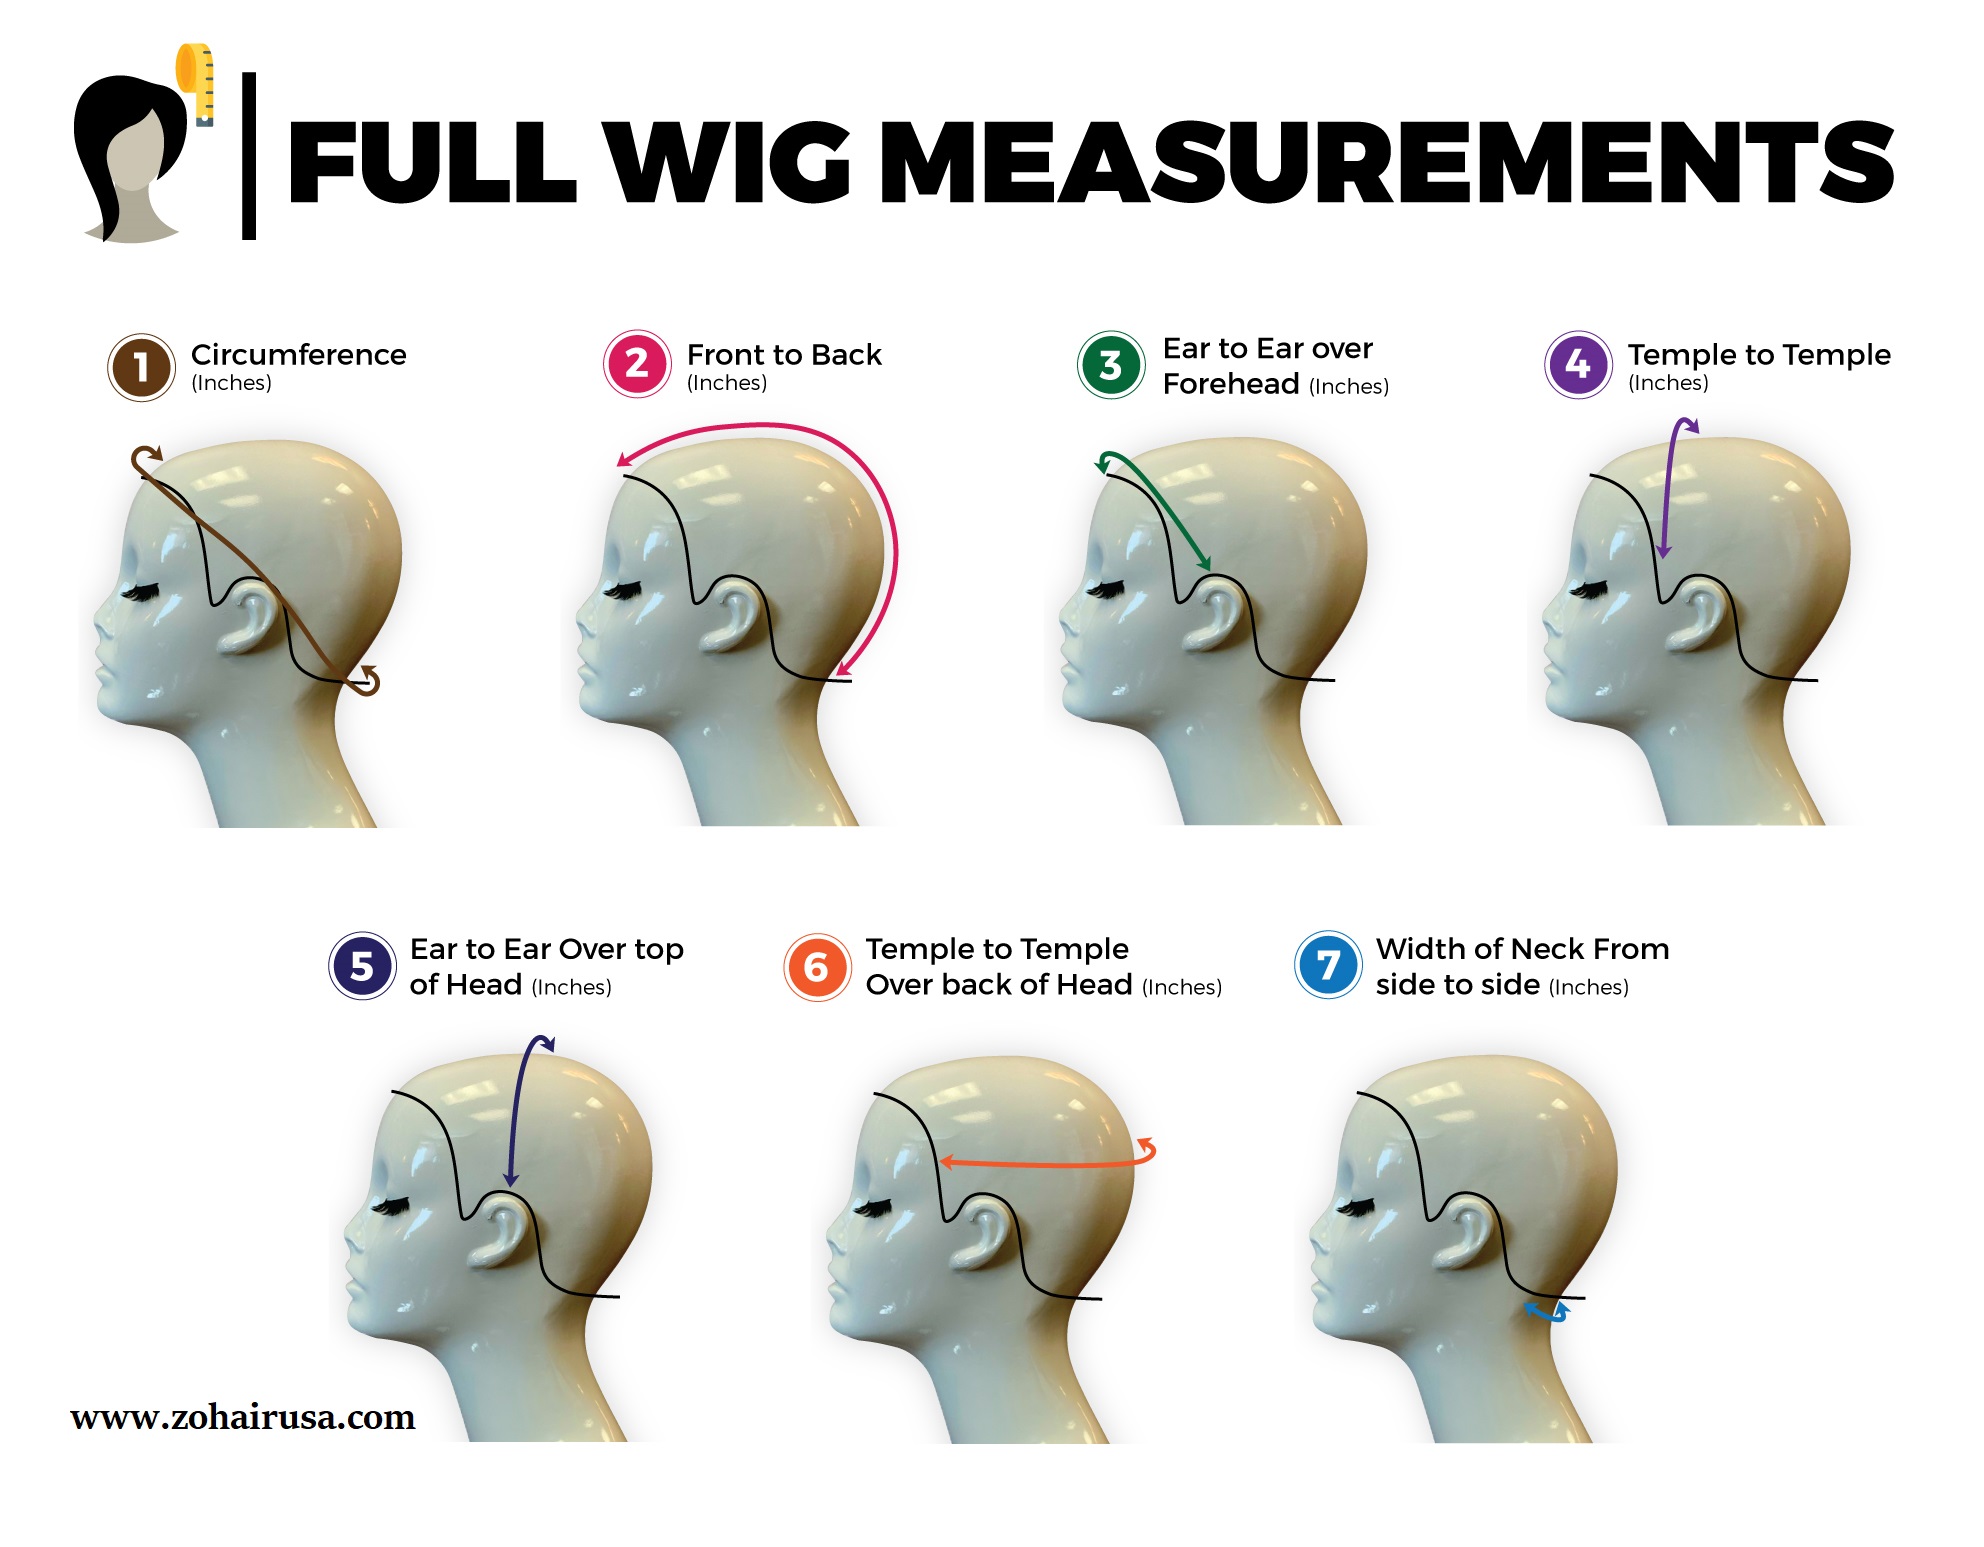 HOW TO MEASURE YOUR HEAD FOR A WIG